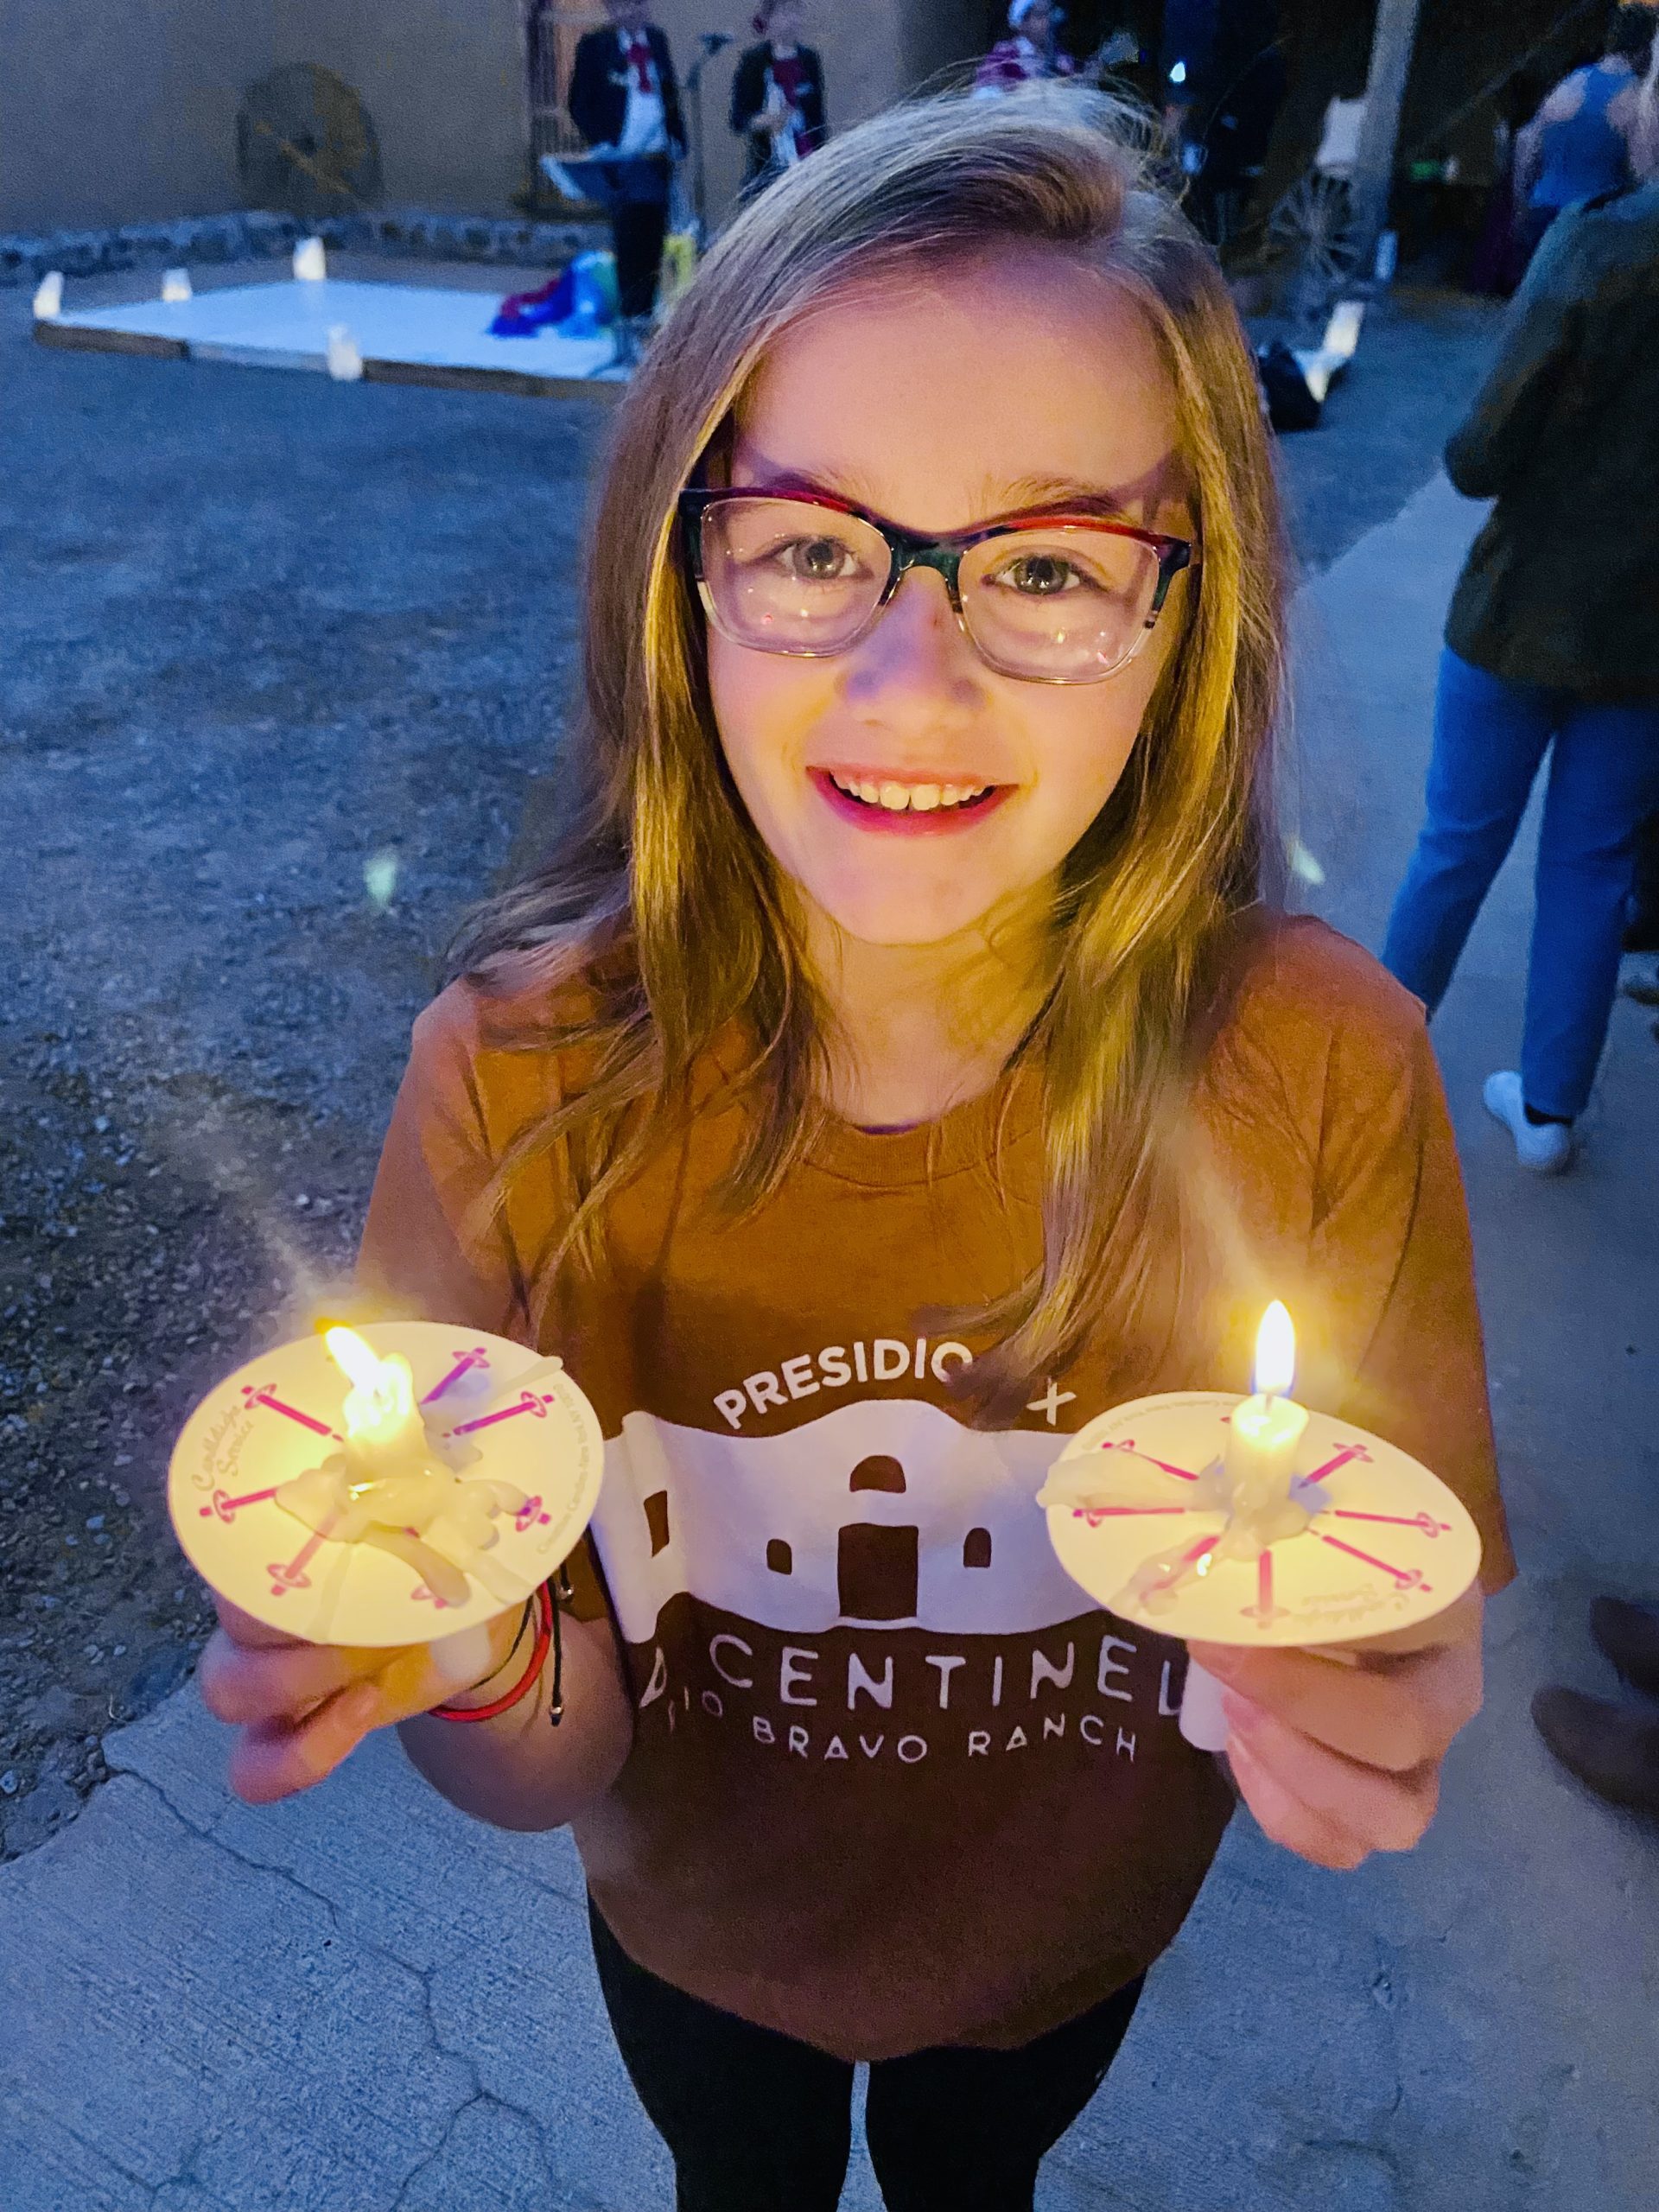 A young girl wearing glasses and a Presidio Texas T-shirt holds two luminarias and smiles for the camera. 